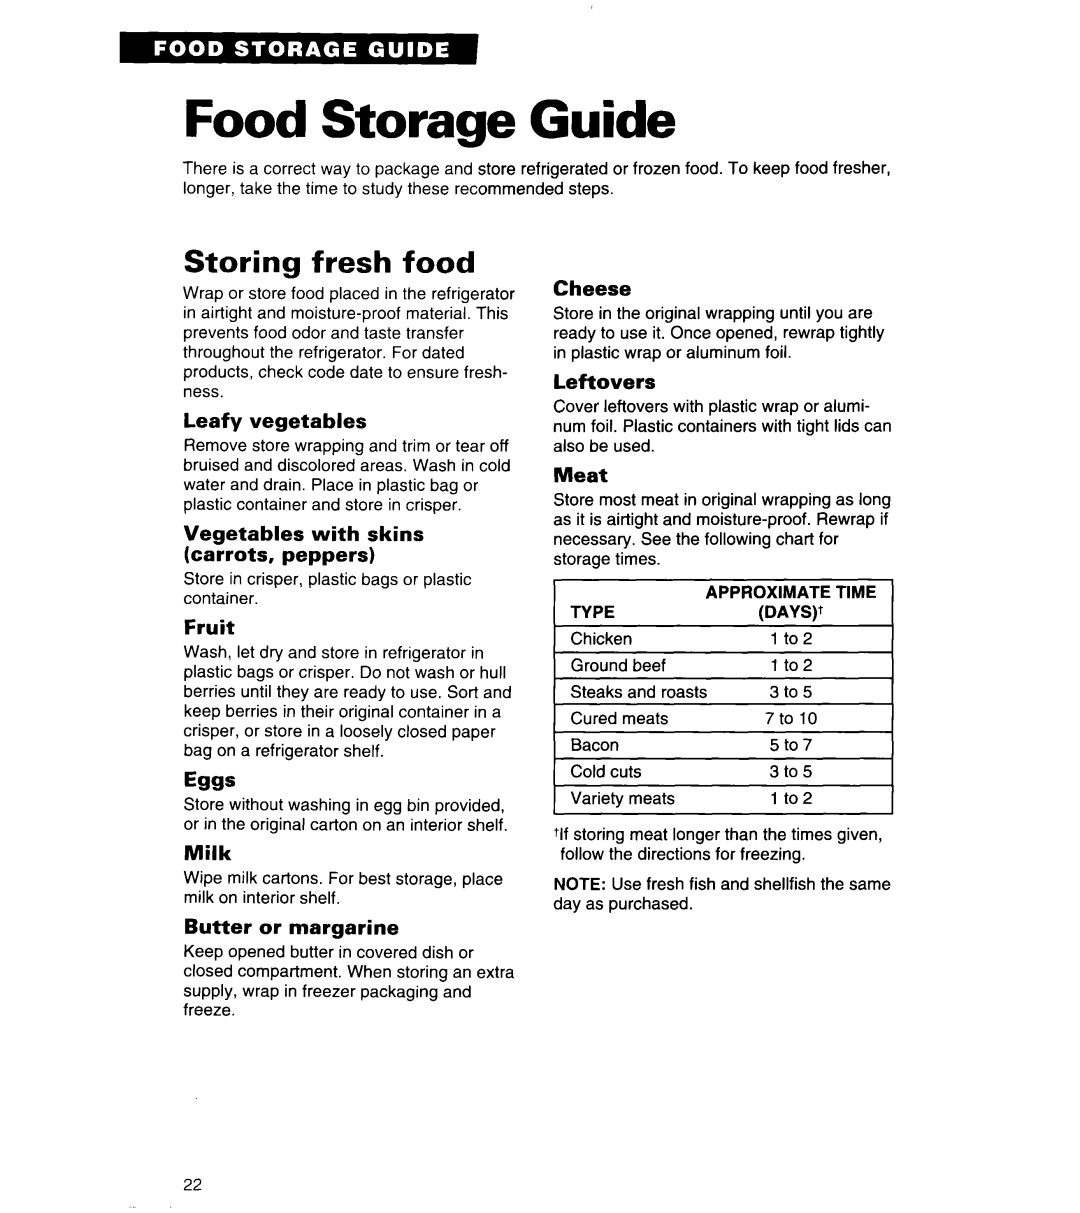 Whirlpool 6ED22ZR Food Storage Guide, Storing fresh food, Leafy vegetables, Vegetables with skins carrots, peppers, Fruit 